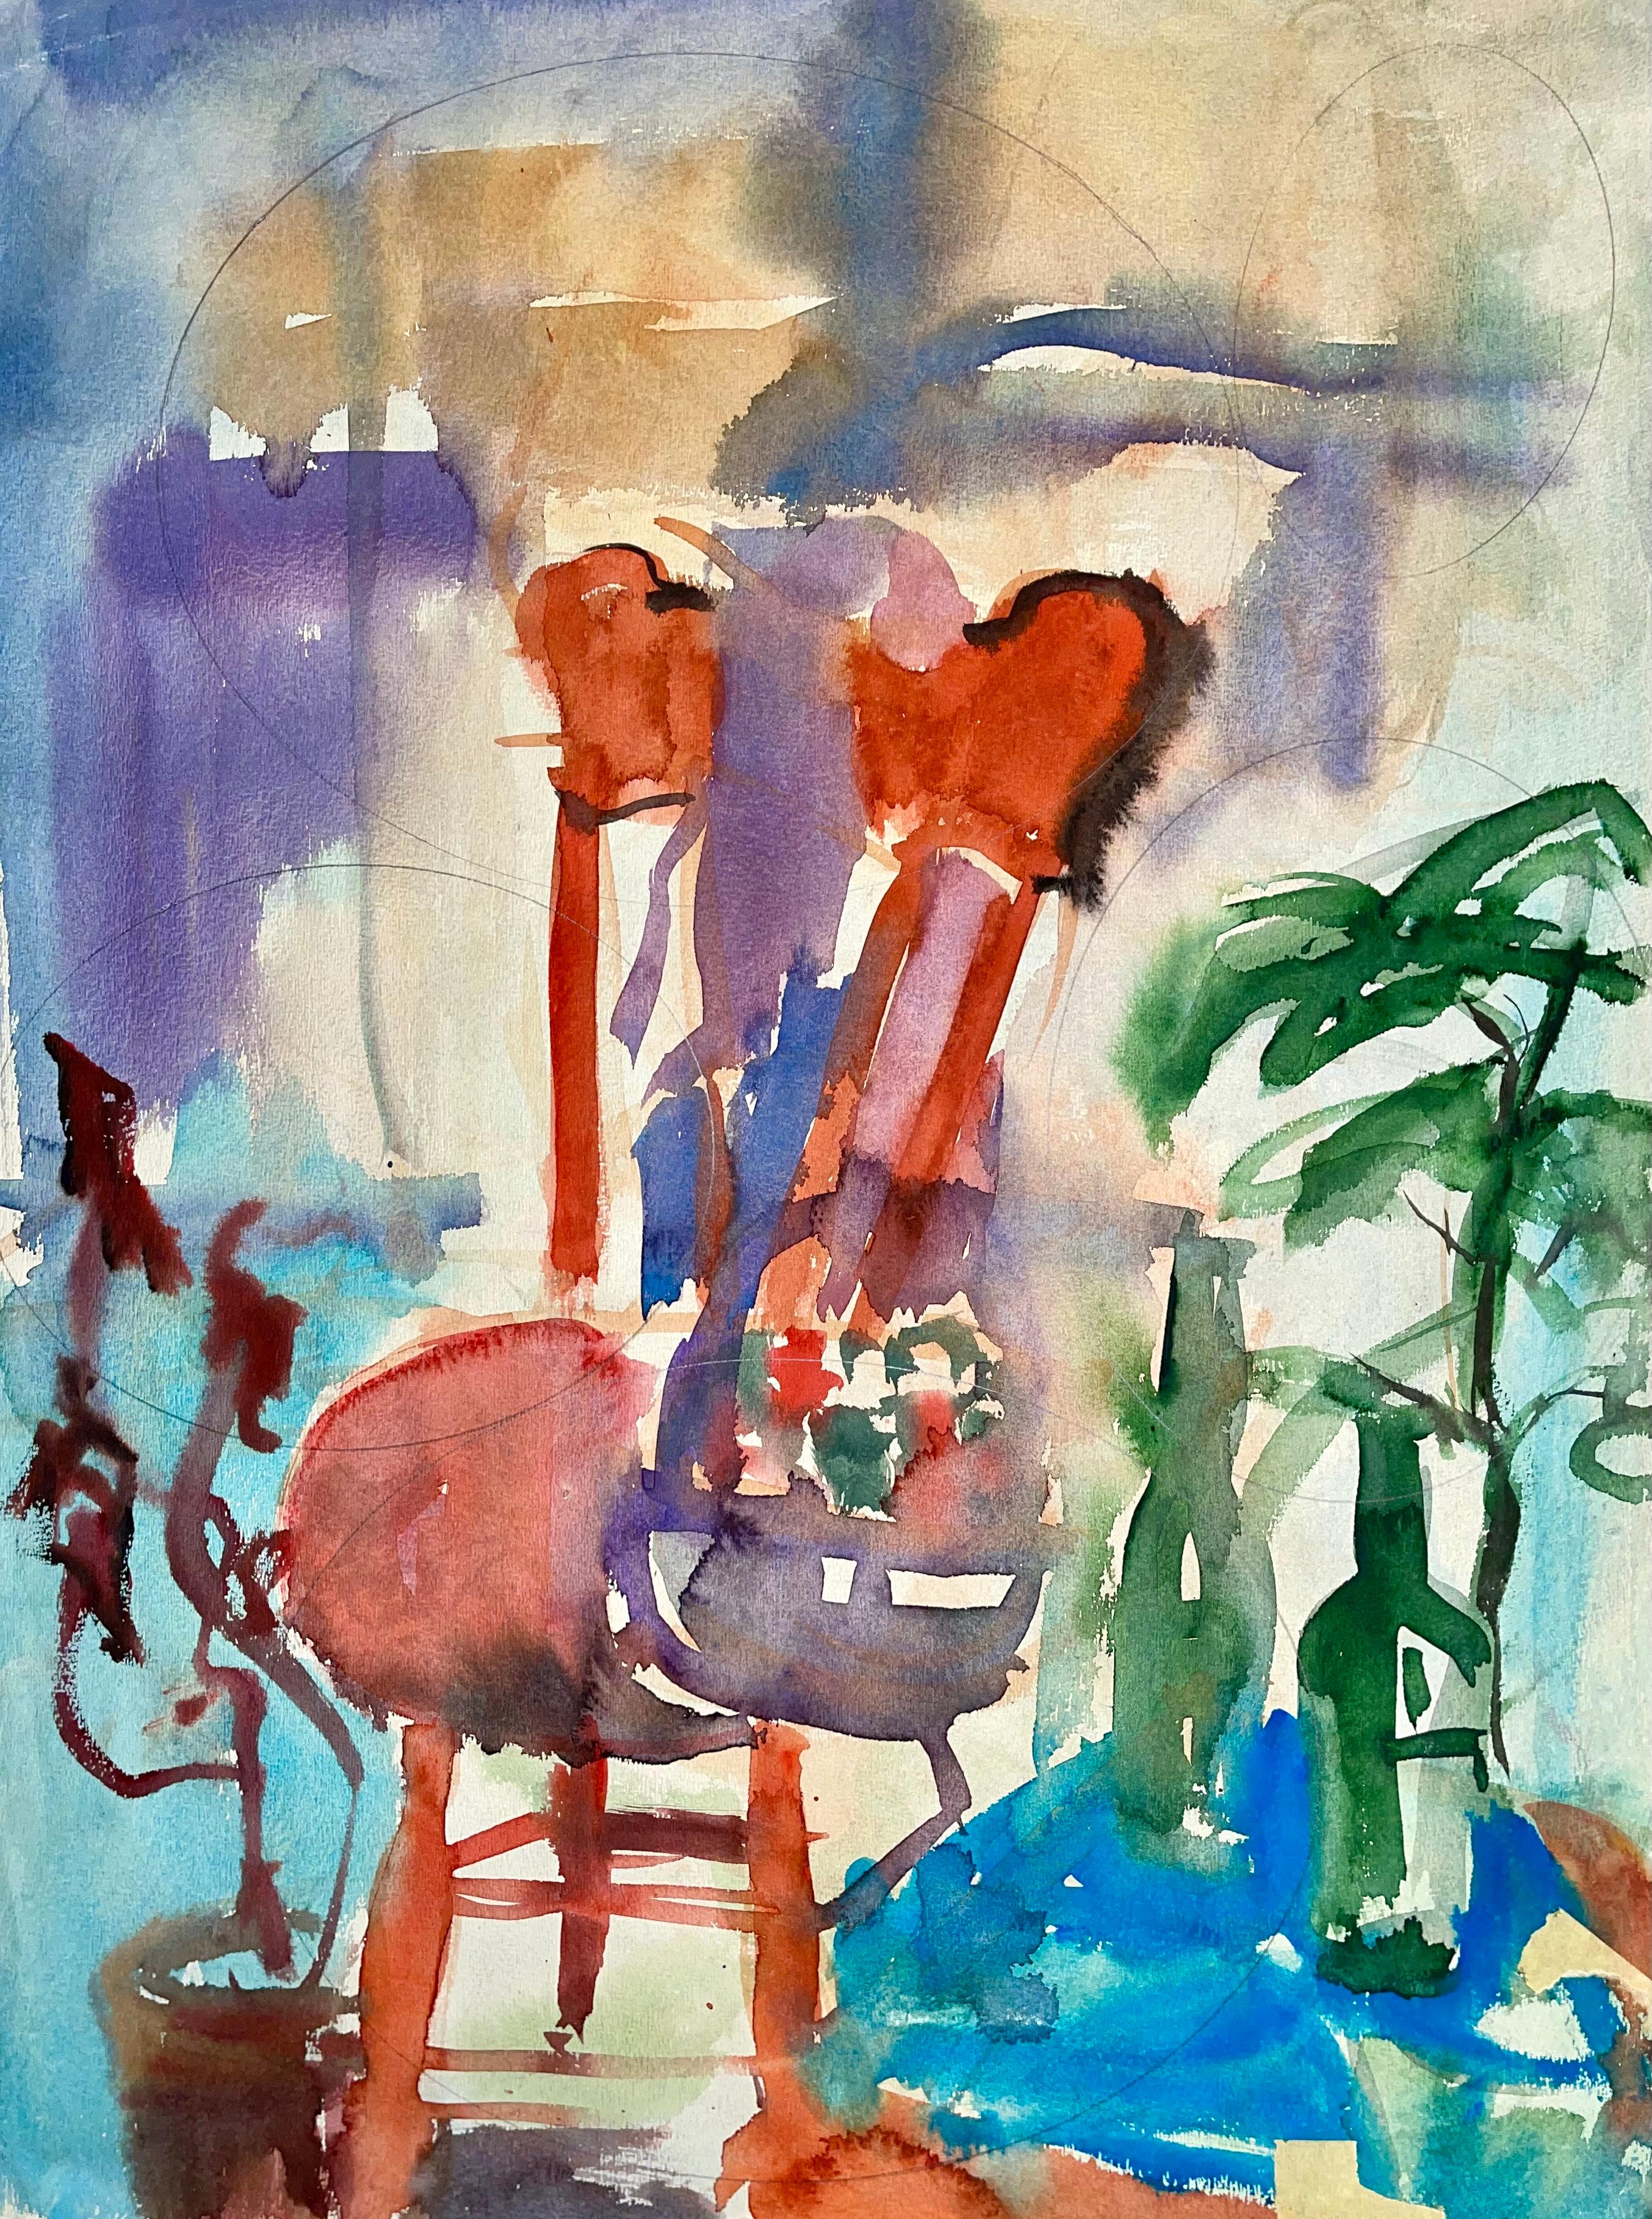 Untitled (Abstract Still Life with Chair, Flowers and Bottles)